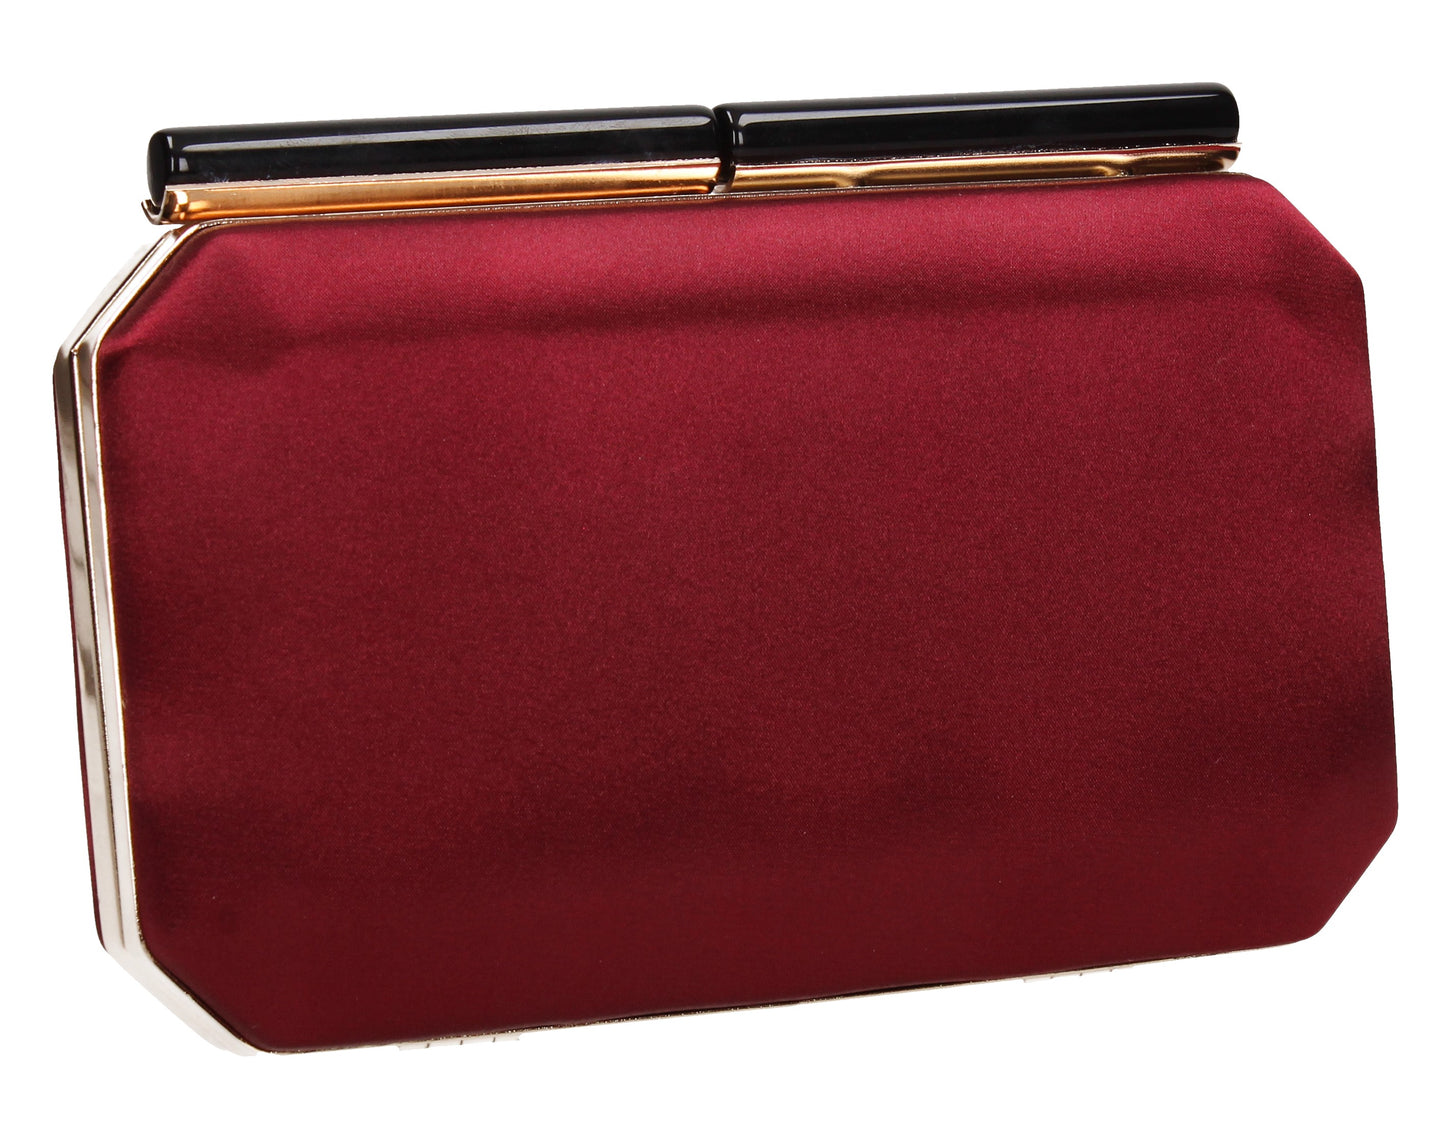 SWANKYSWANS Millie Clutch Bag Red Cute Cheap Clutch Bag For Weddings School and Work